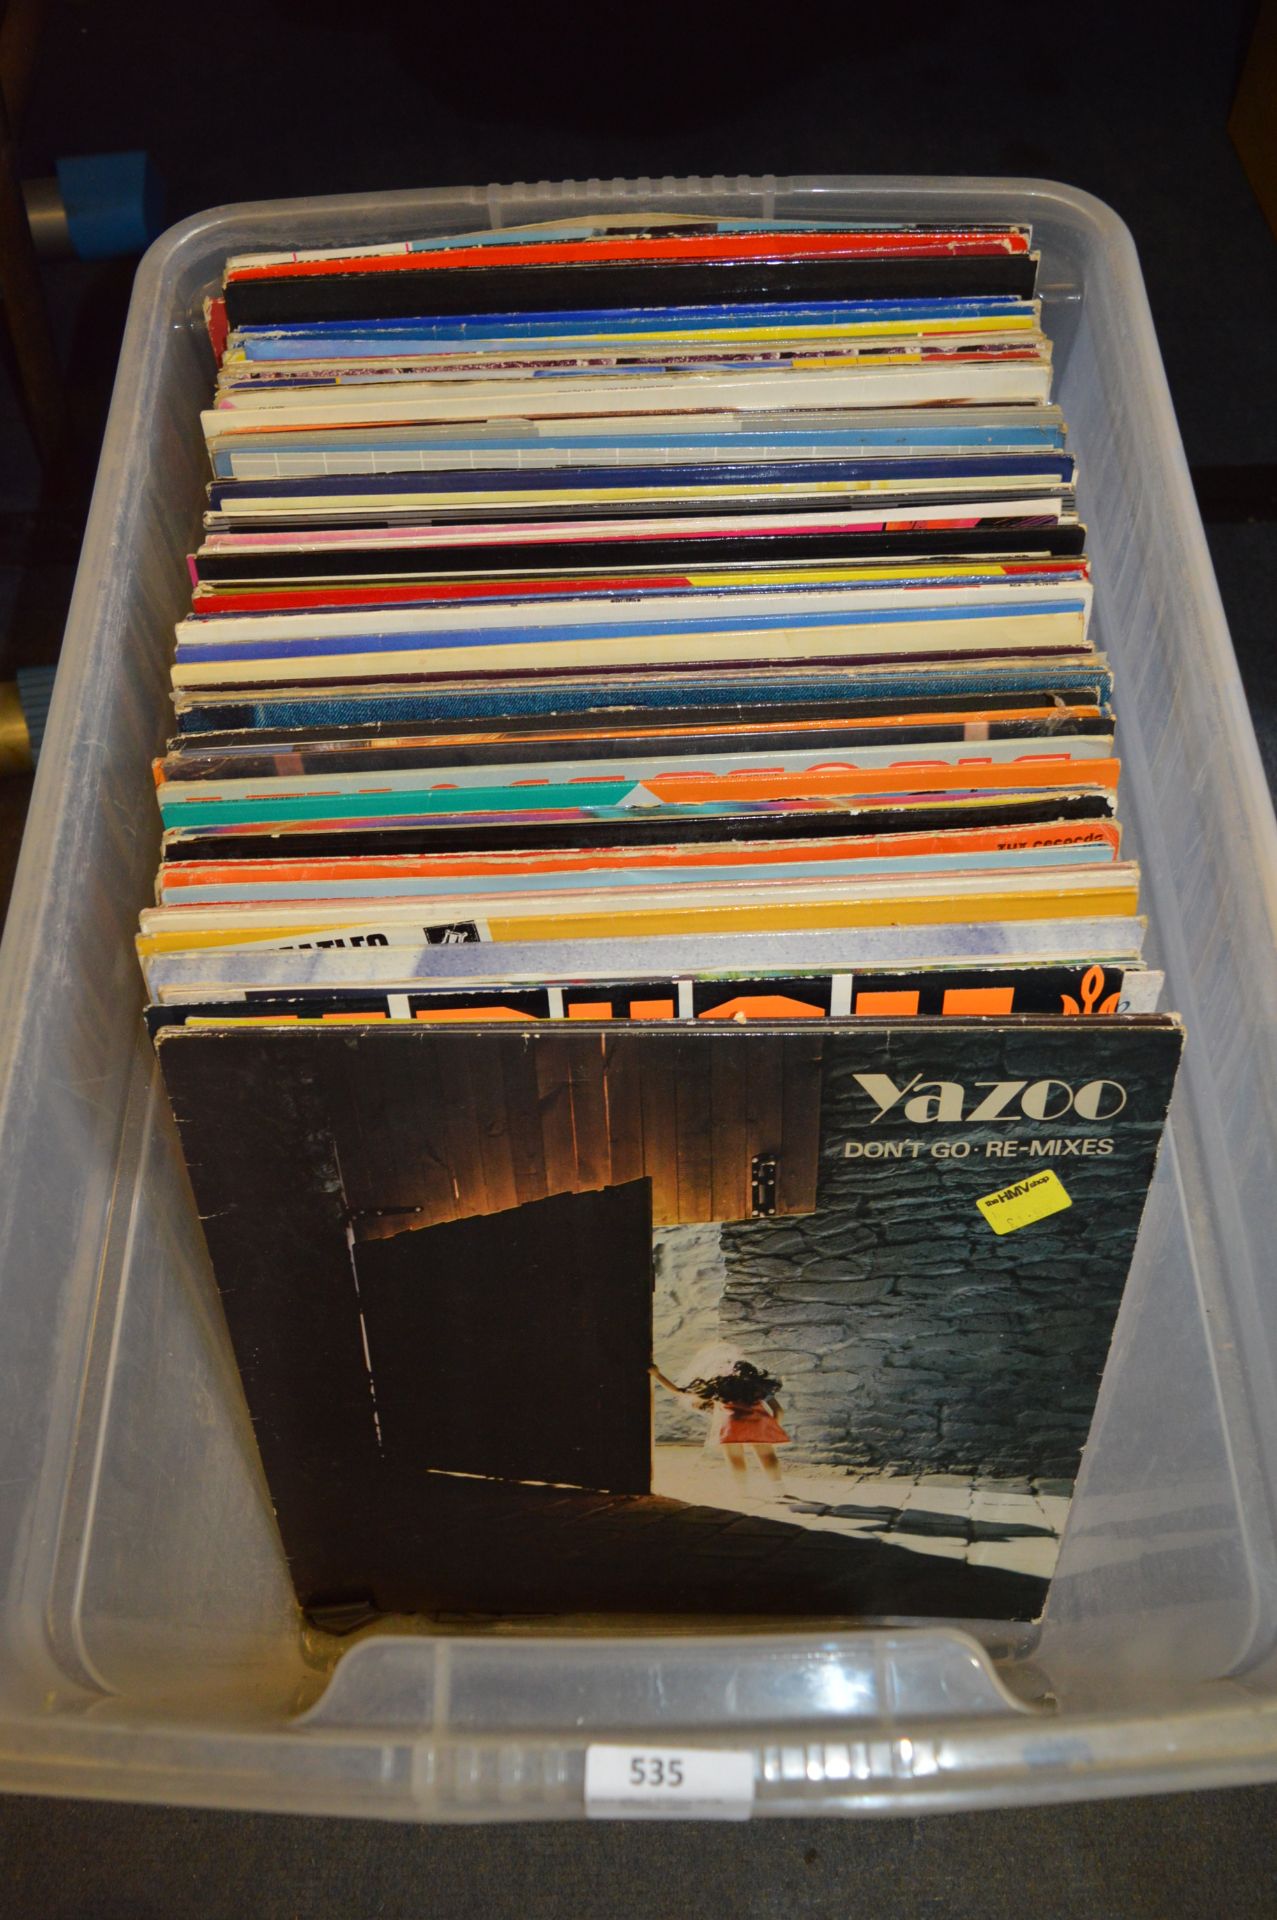 Large Collection of 12" Singles, Some LPs, Mostly 80's Artists